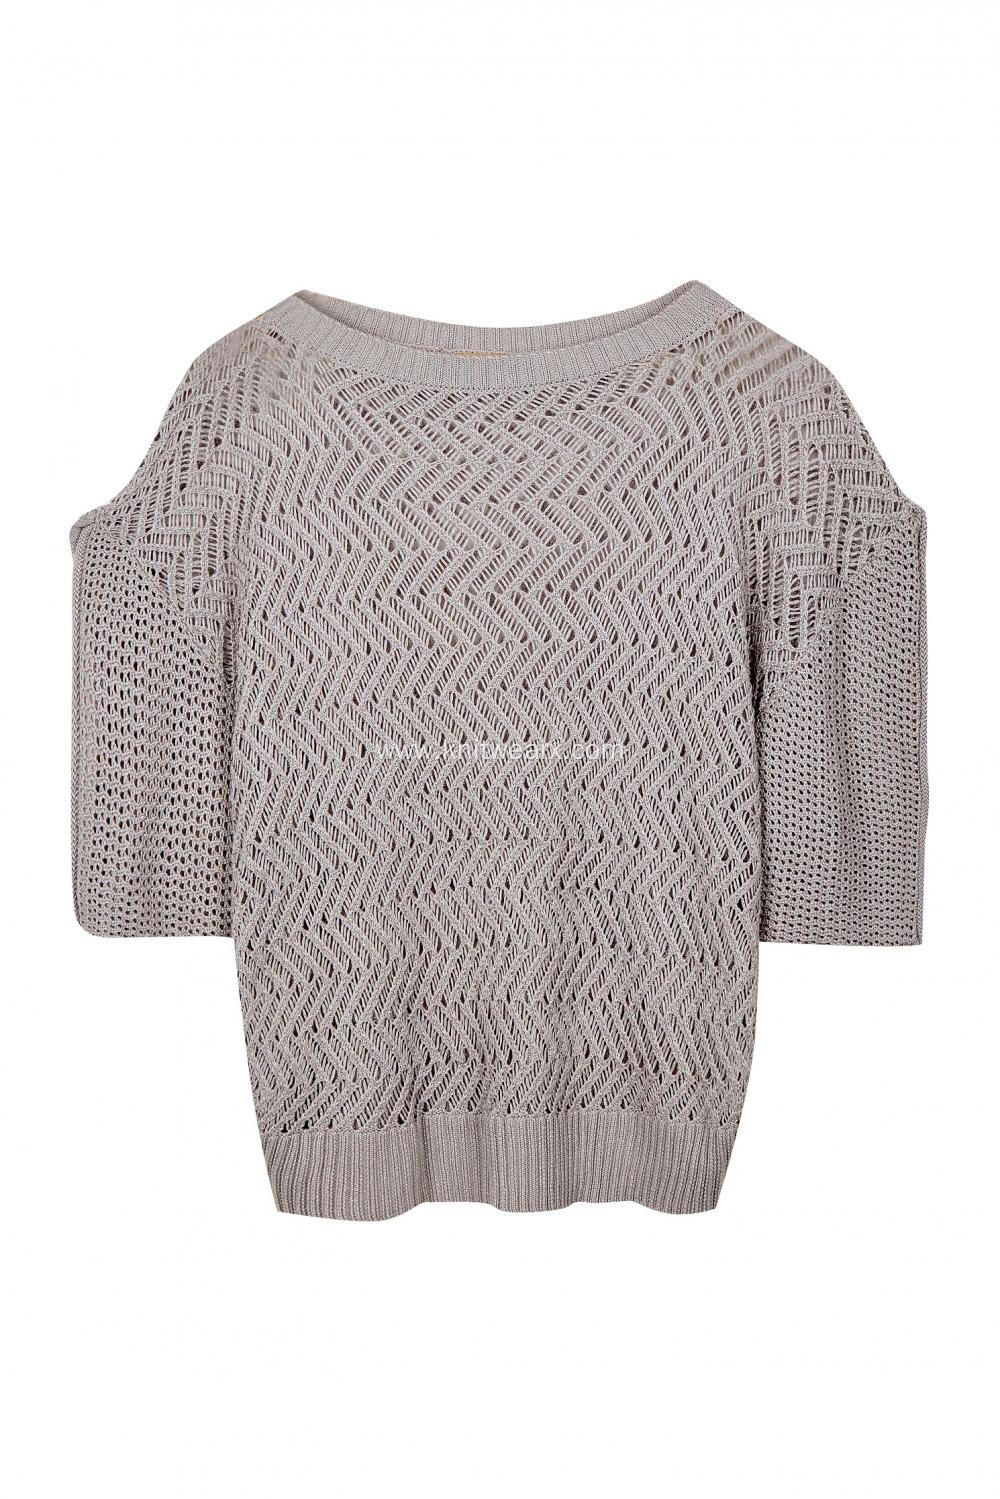 Women's Knitted Pointelle Boat Neck Drop Shoulder Pullover